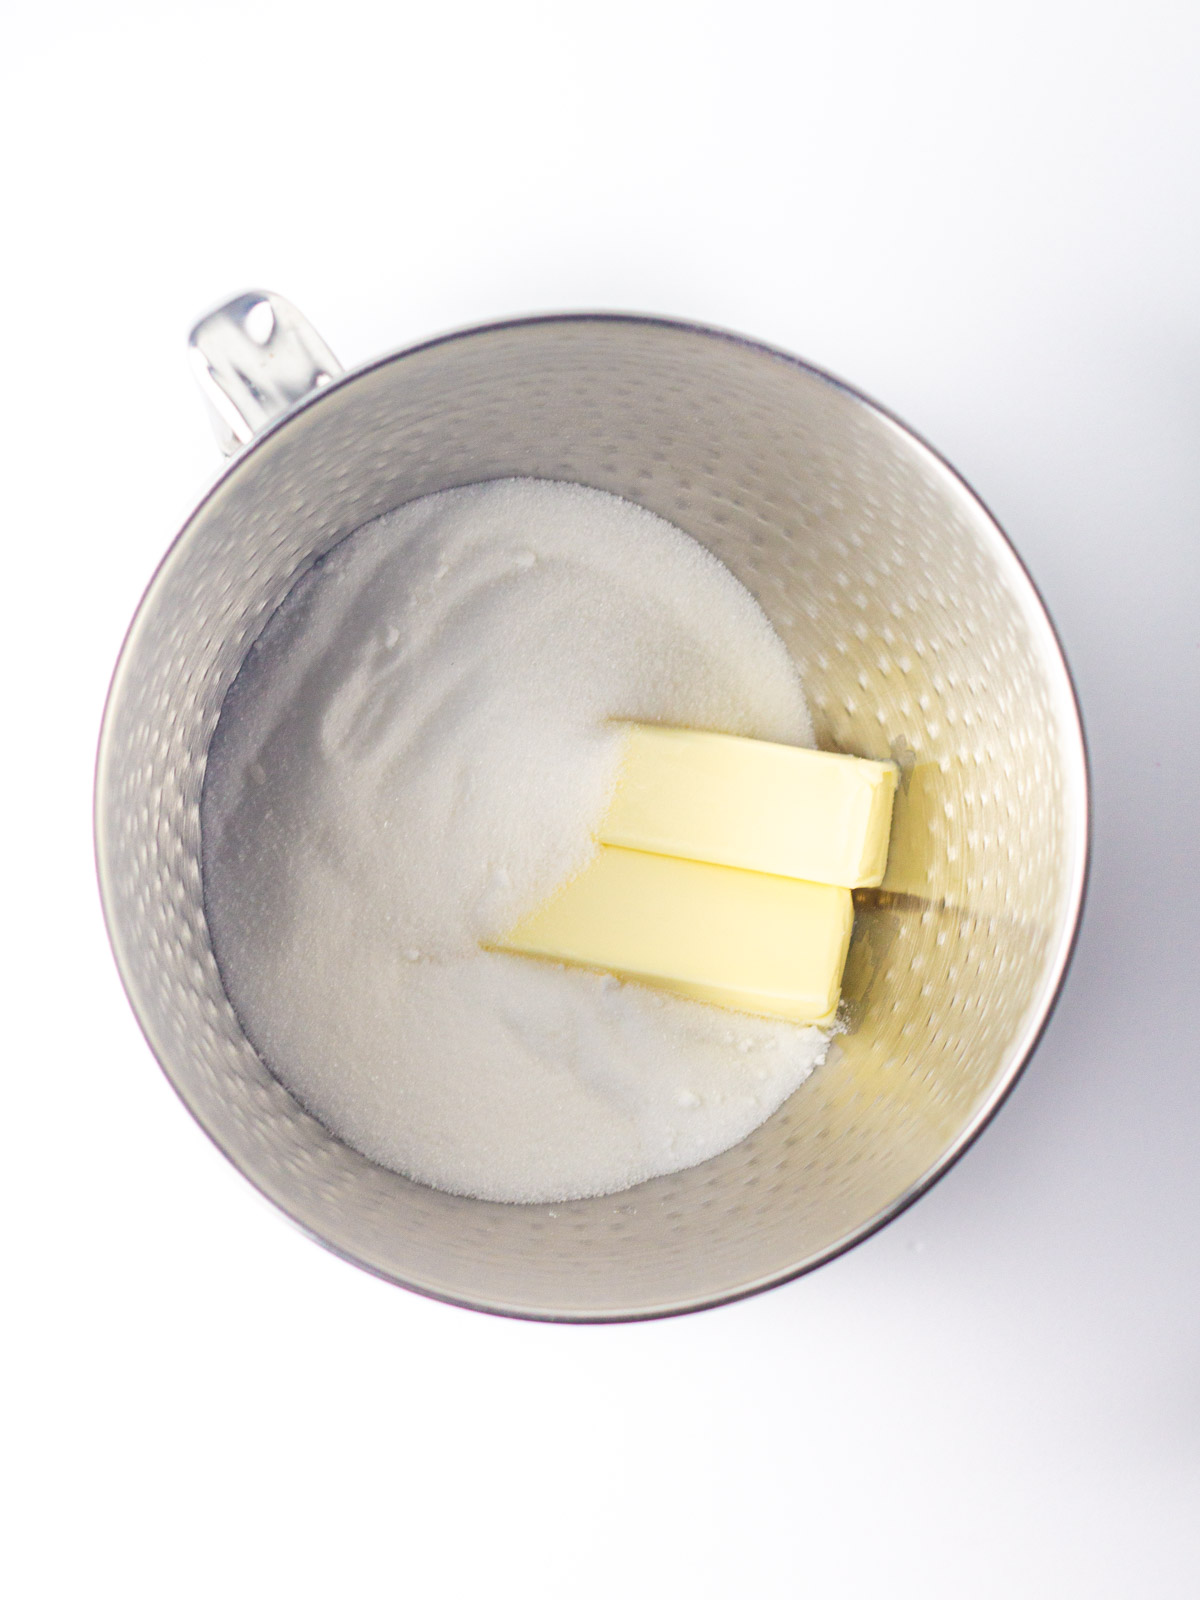 Two sticks of butter and sugar in a silver, textured mixing bowl.